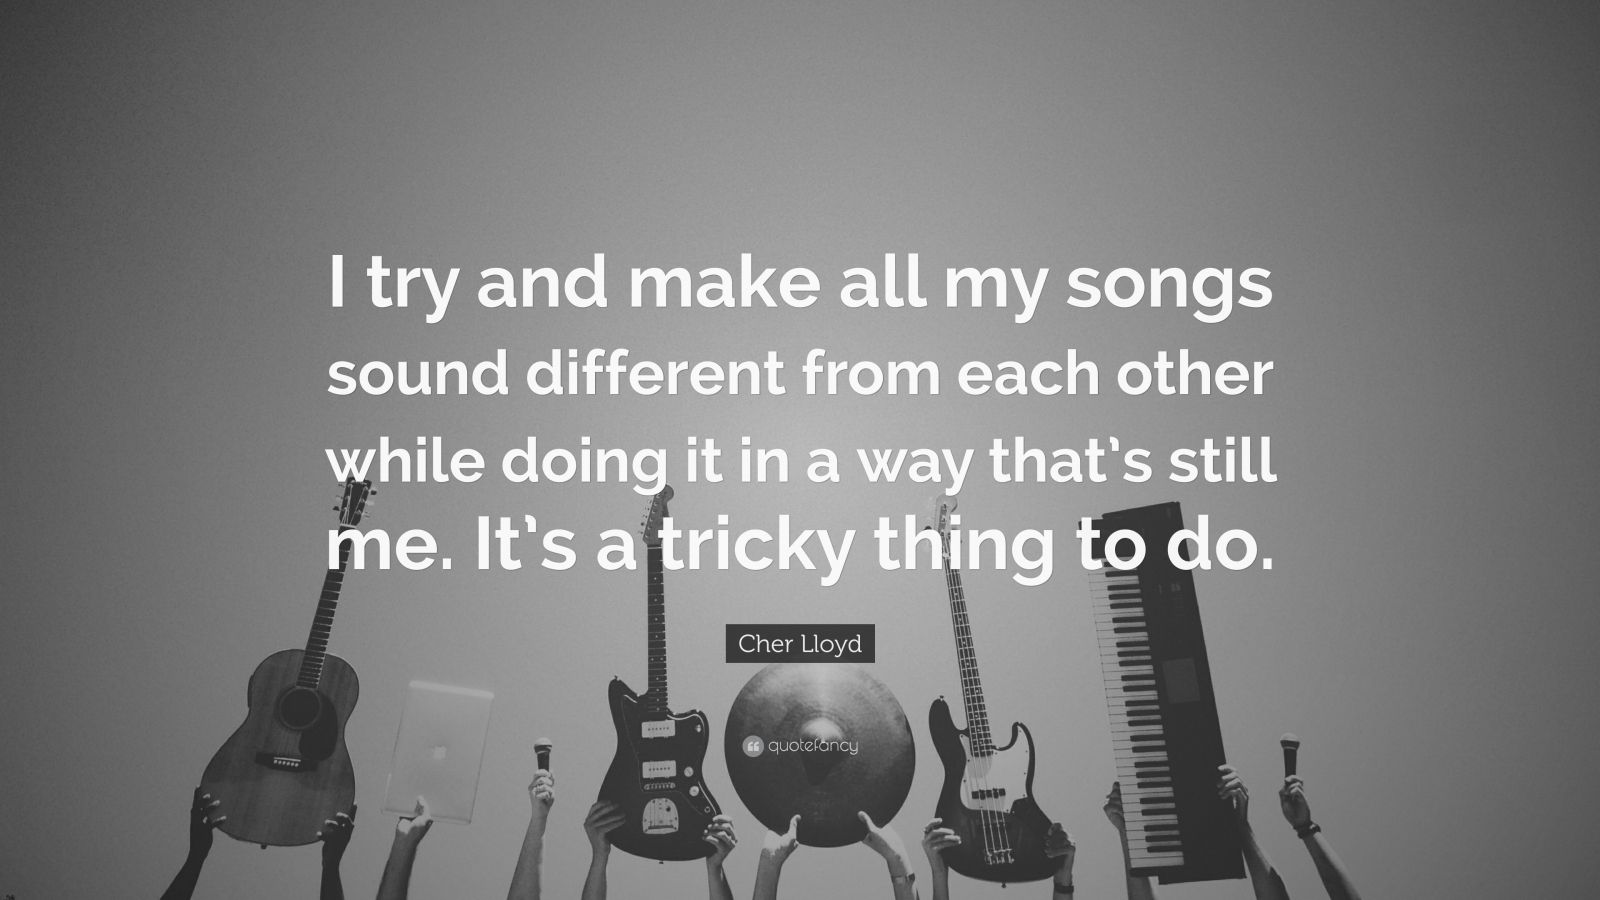 Cher Lloyd Quote: “I try and make all my songs sound different from ...